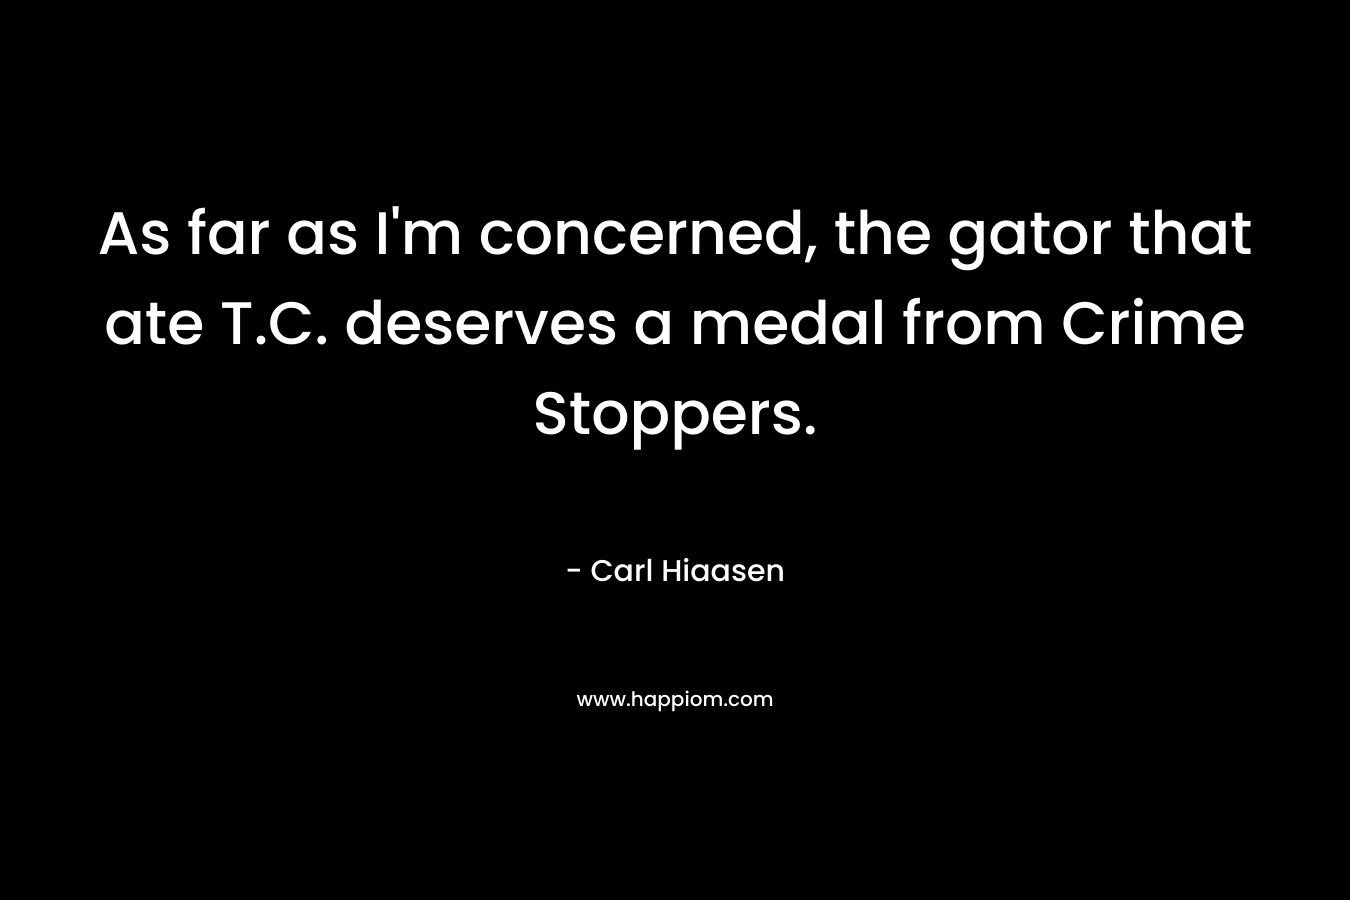 As far as I'm concerned, the gator that ate T.C. deserves a medal from Crime Stoppers.